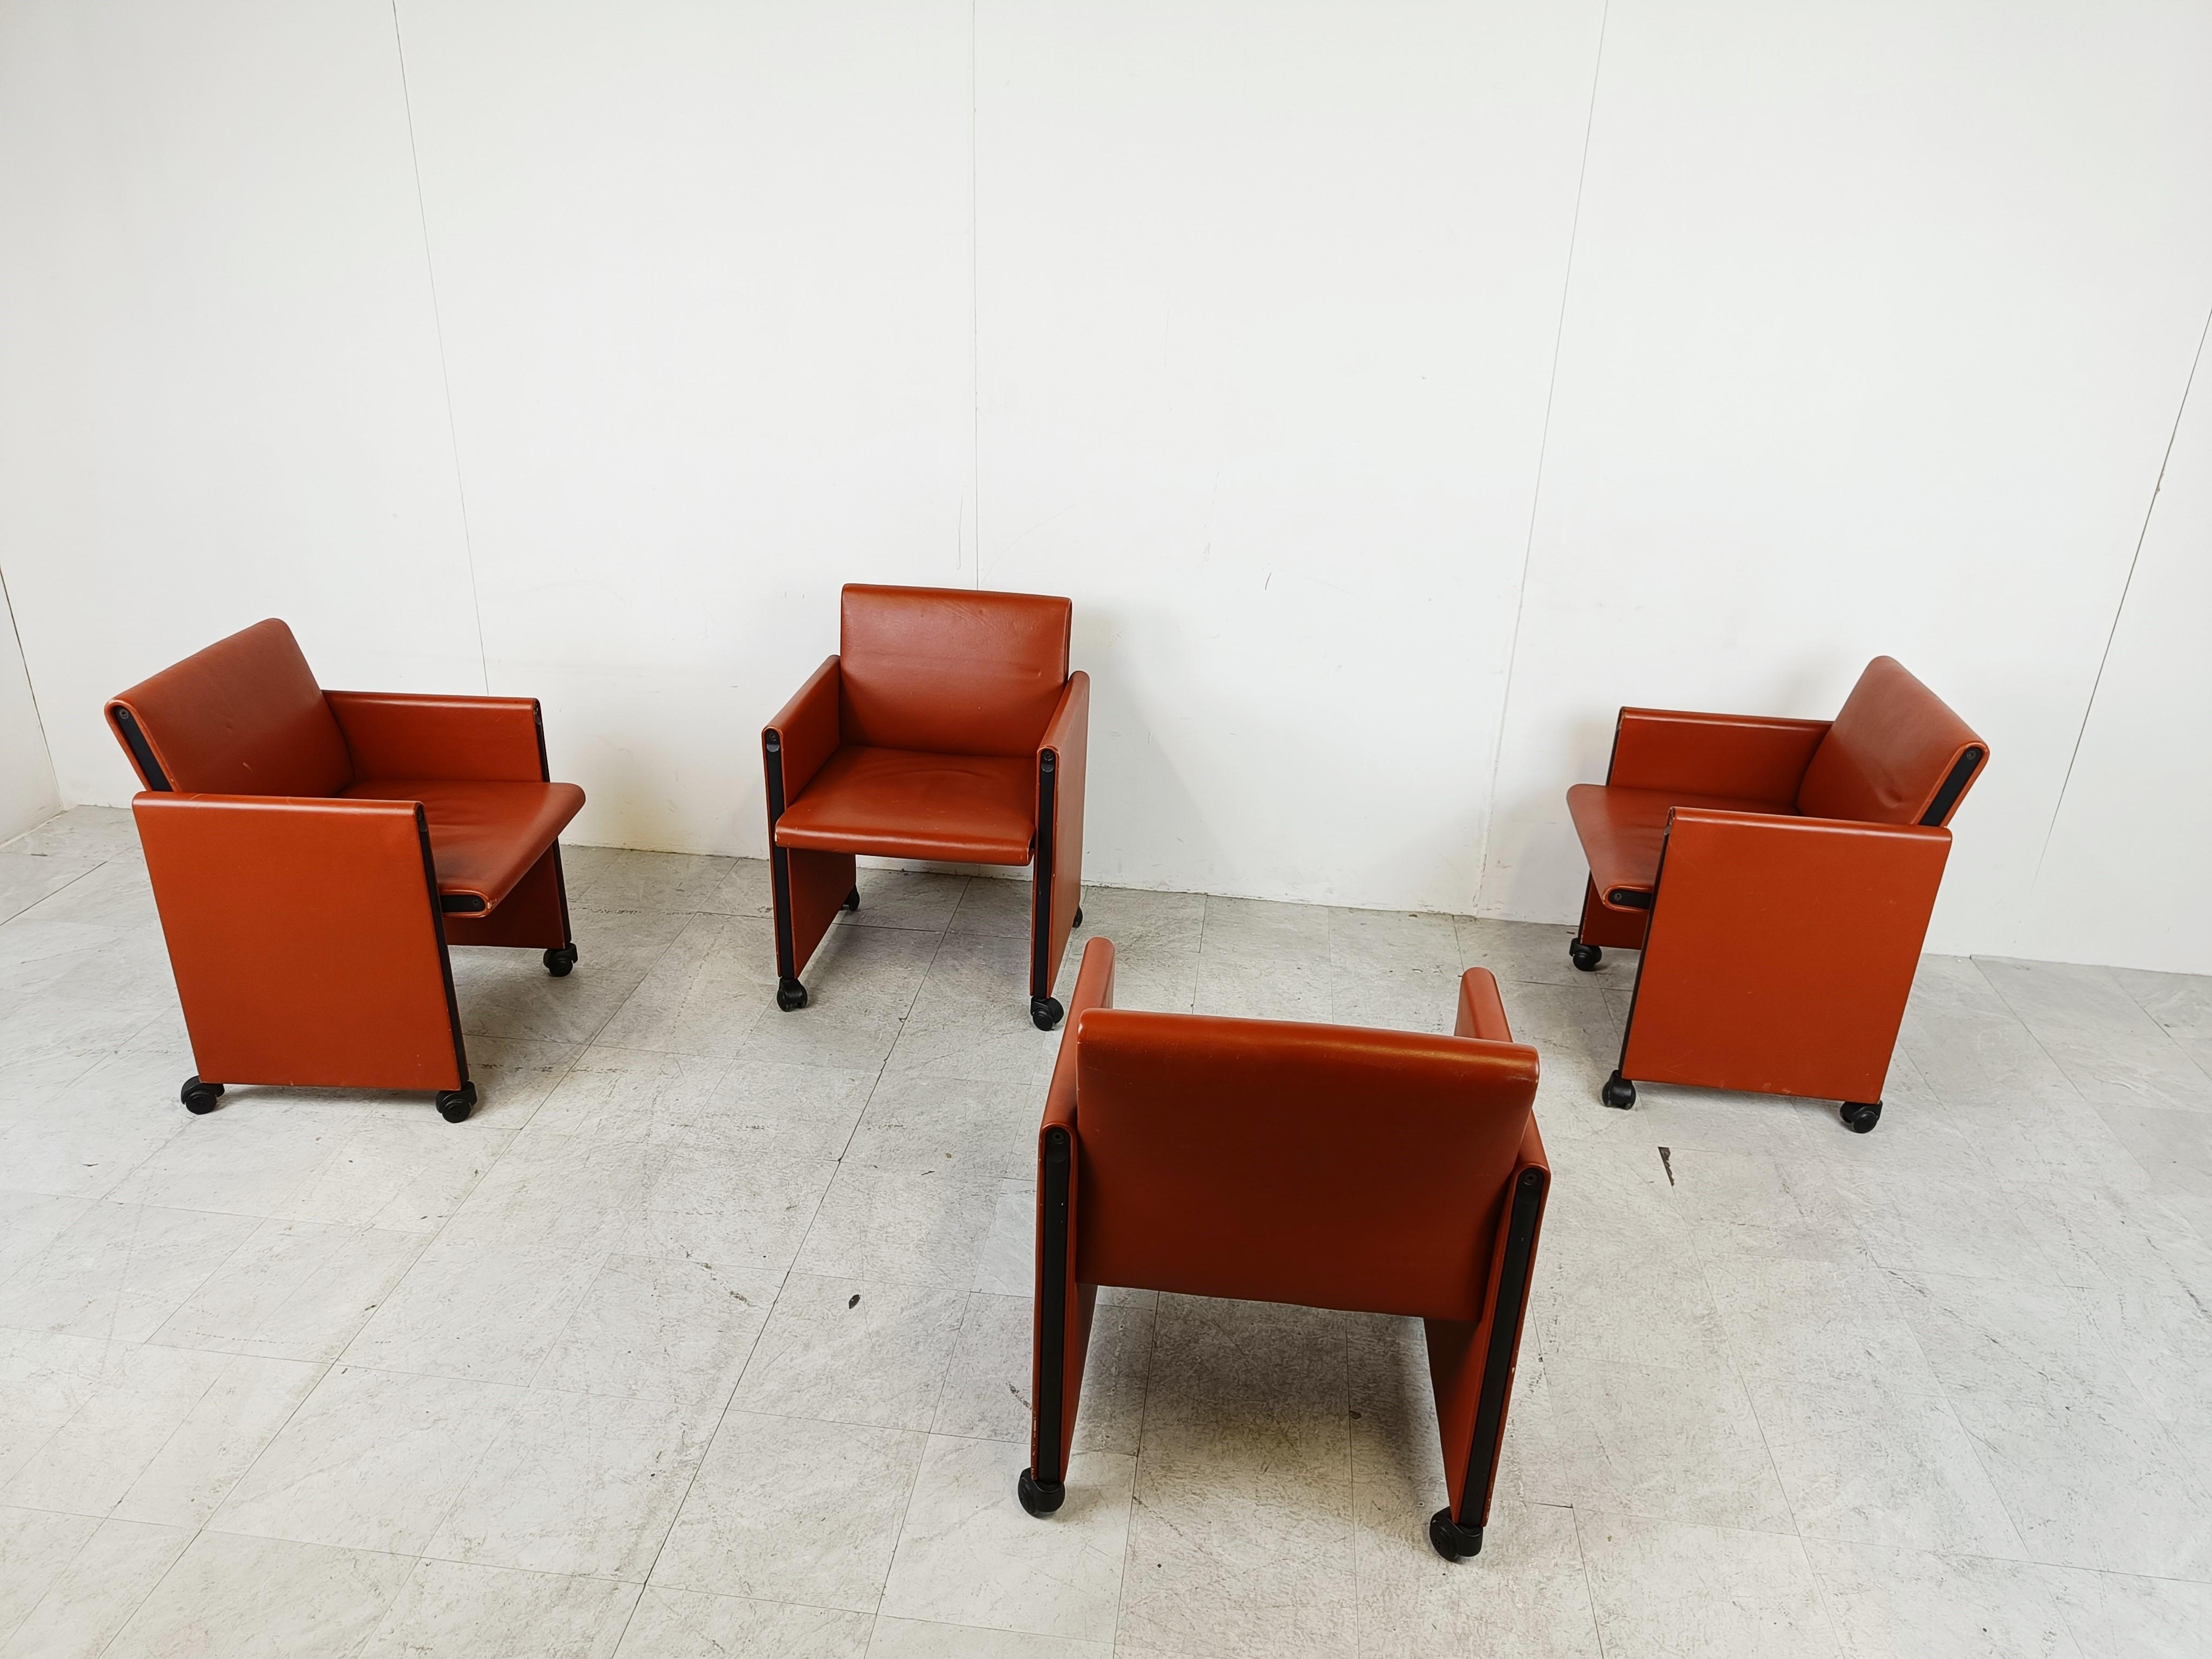 Vintage Giulietta Chairs by Afra and Tobia Scarpa for Meritalia, 1980s 2